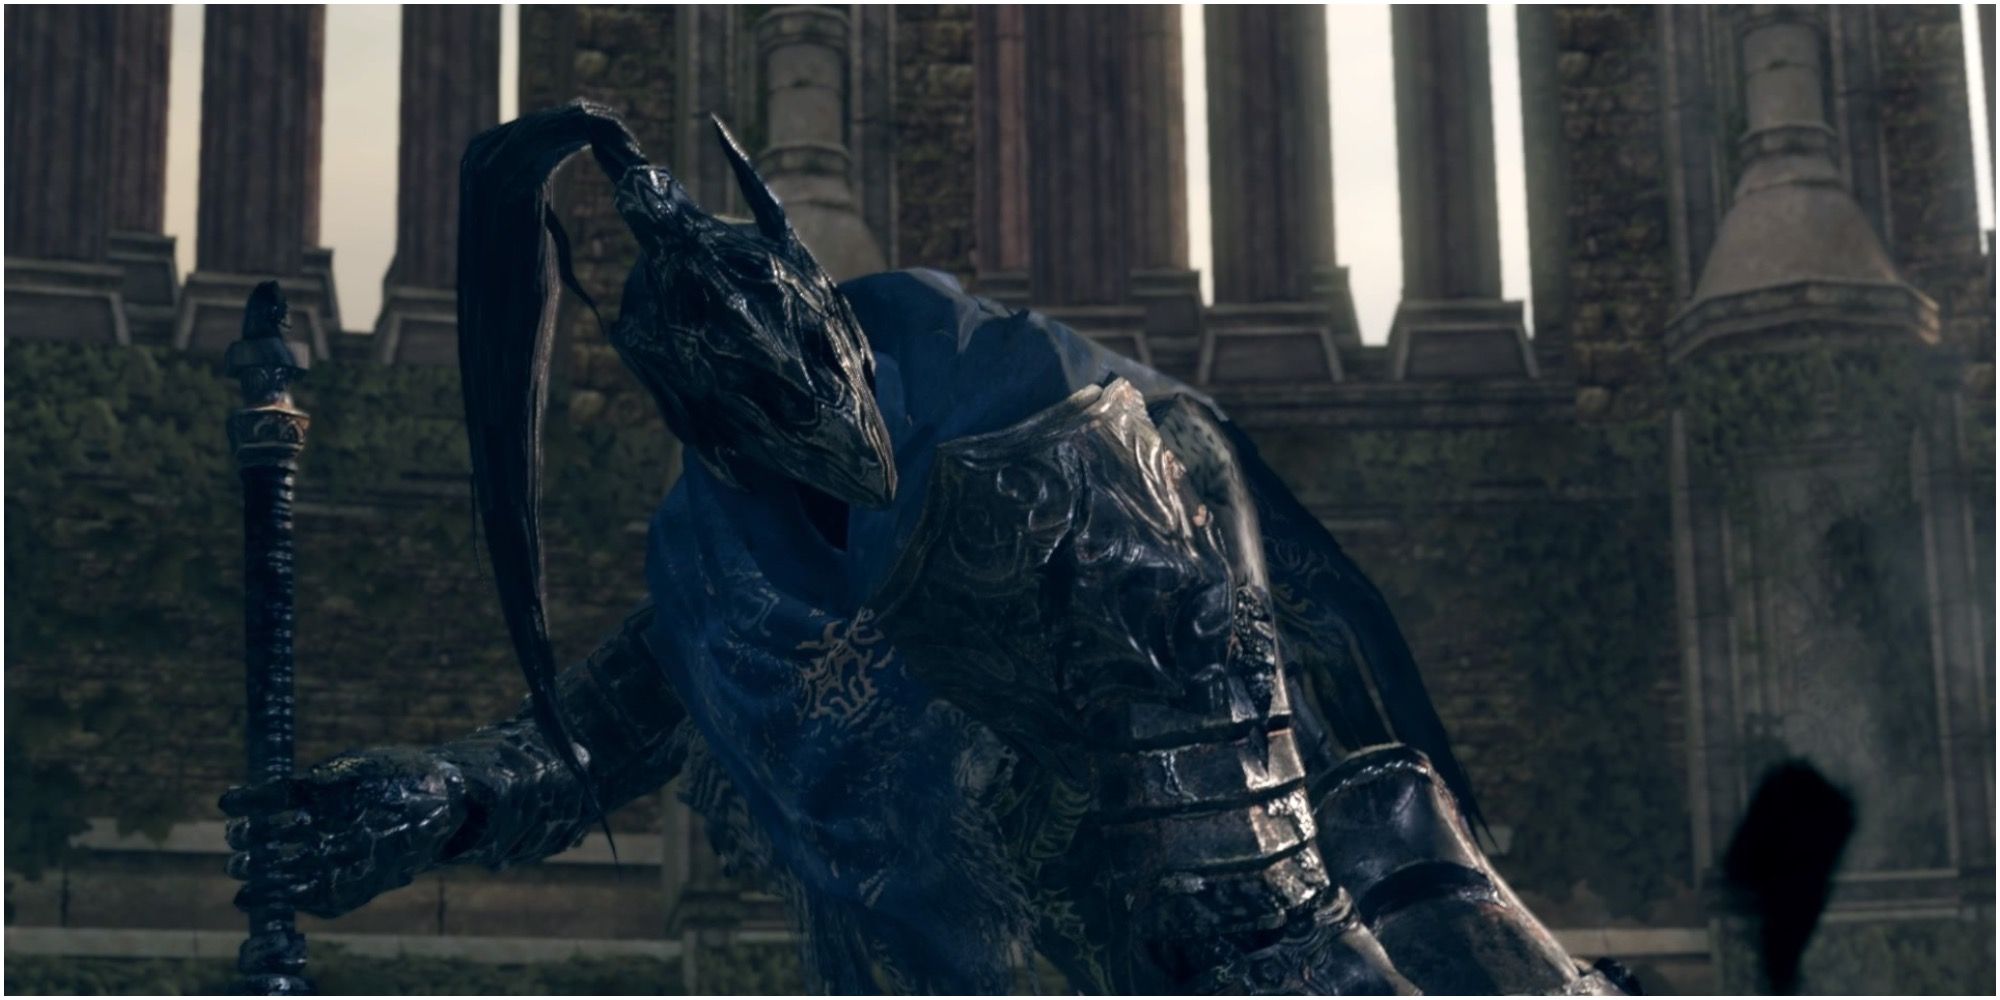 Artorias of the Abyss in Darks Souls 2